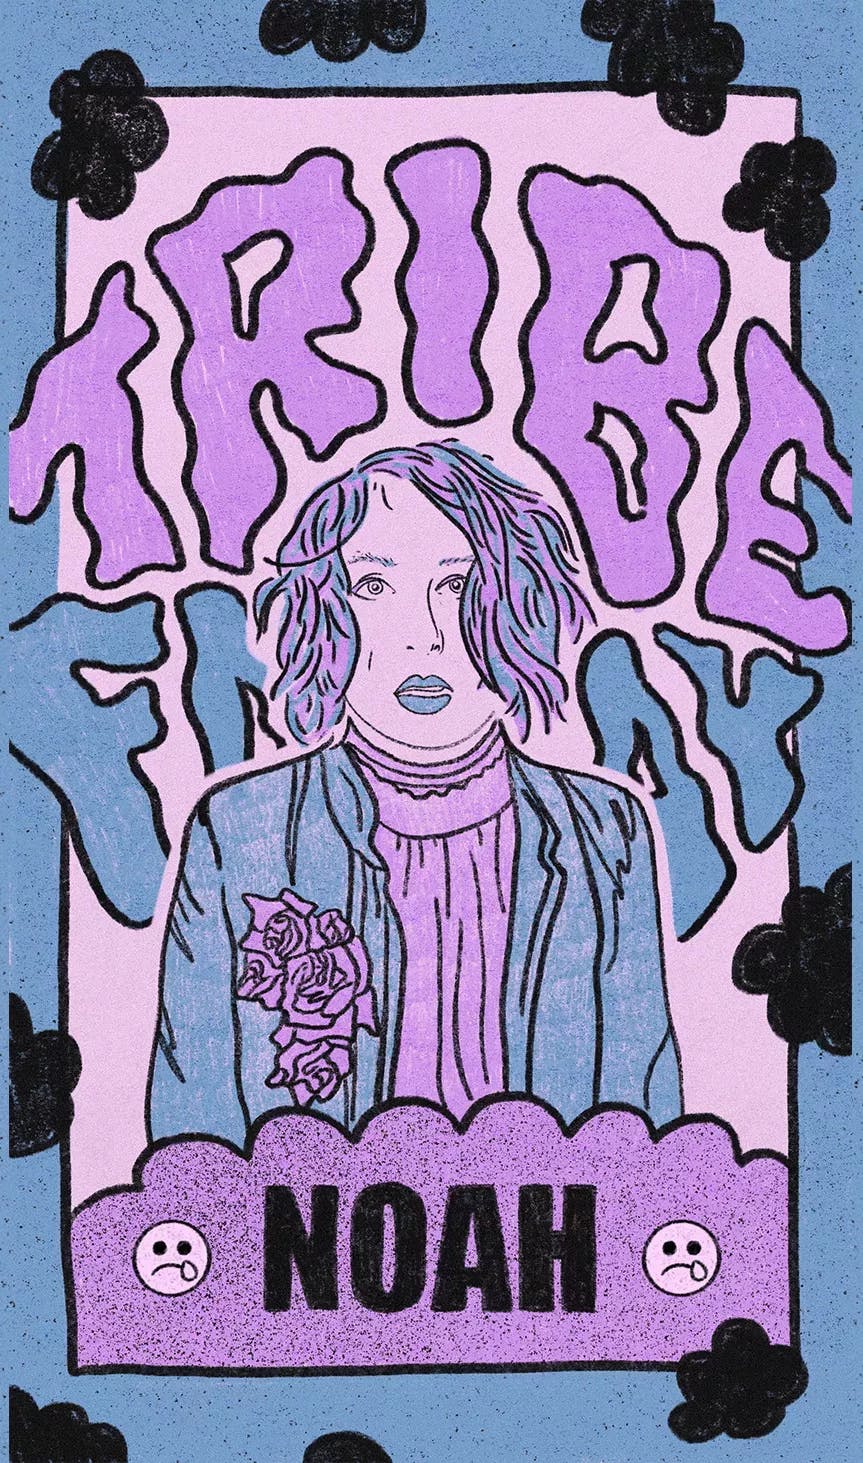 Tribe Friday cover art that says the band's name, the name "Noah", and a blue, pink, purple, and black background